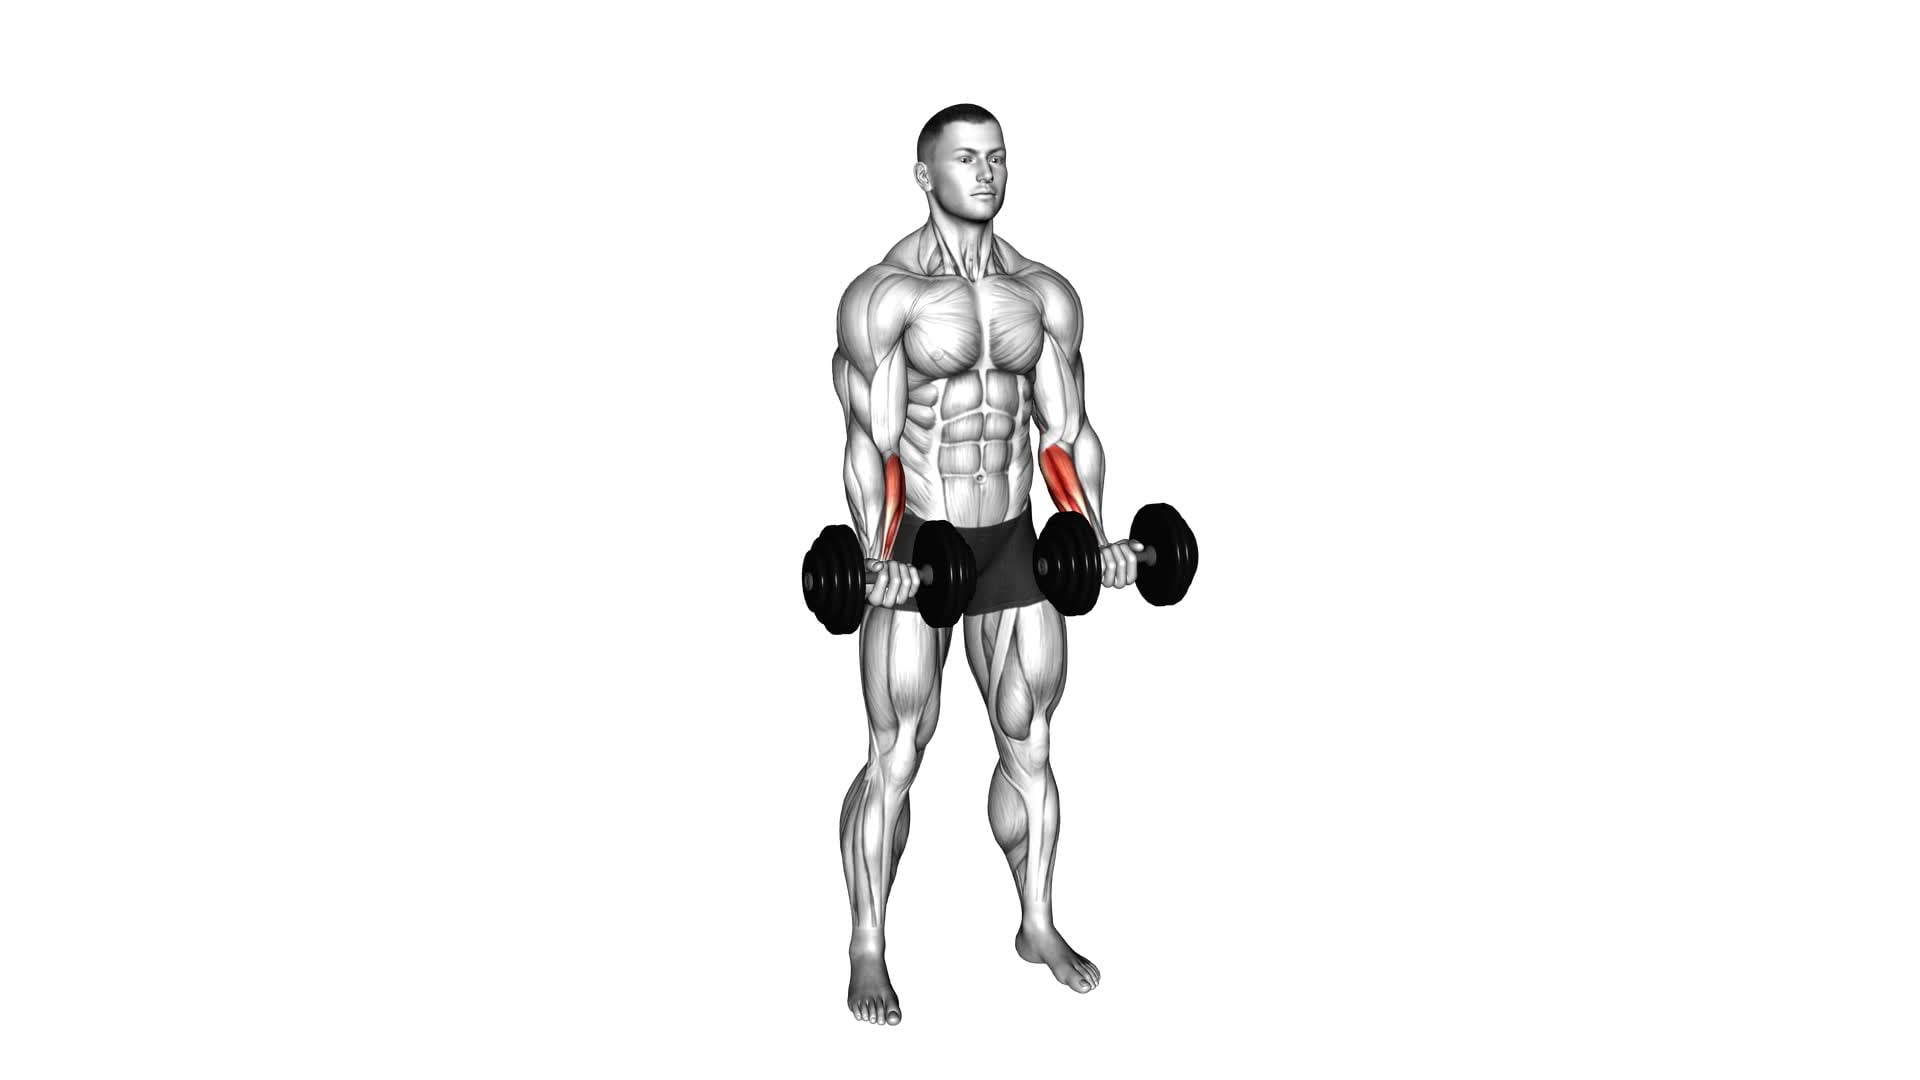 Dumbbell Standing Wrist Curl - Video Exercise Guide & Tips